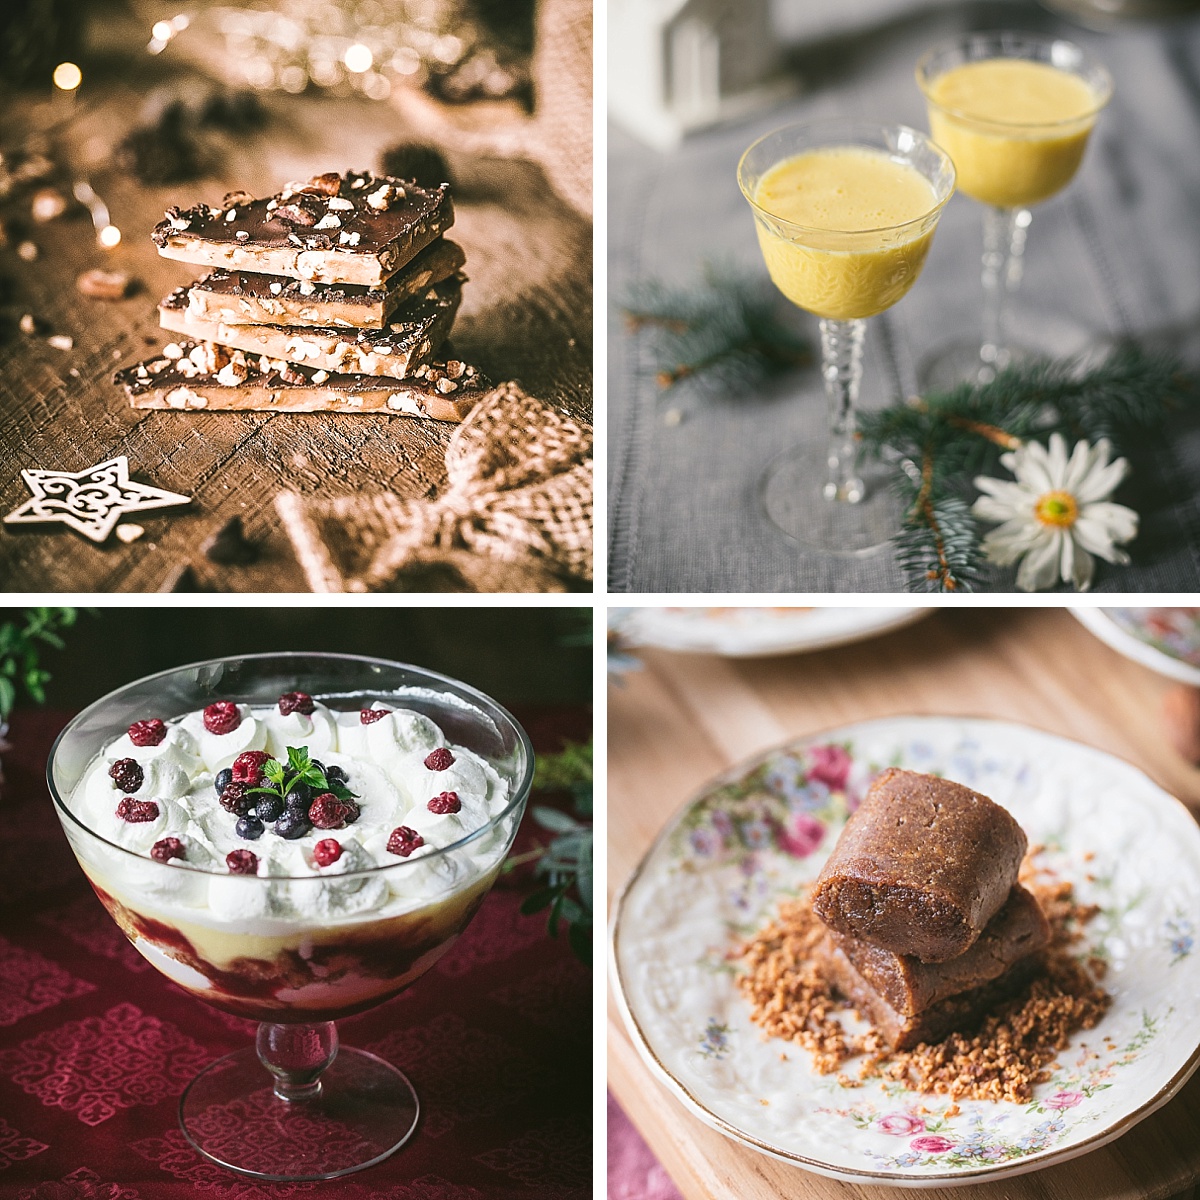 CHRISTMAS MEMORIES WITH RECIPES, Multiple Authors